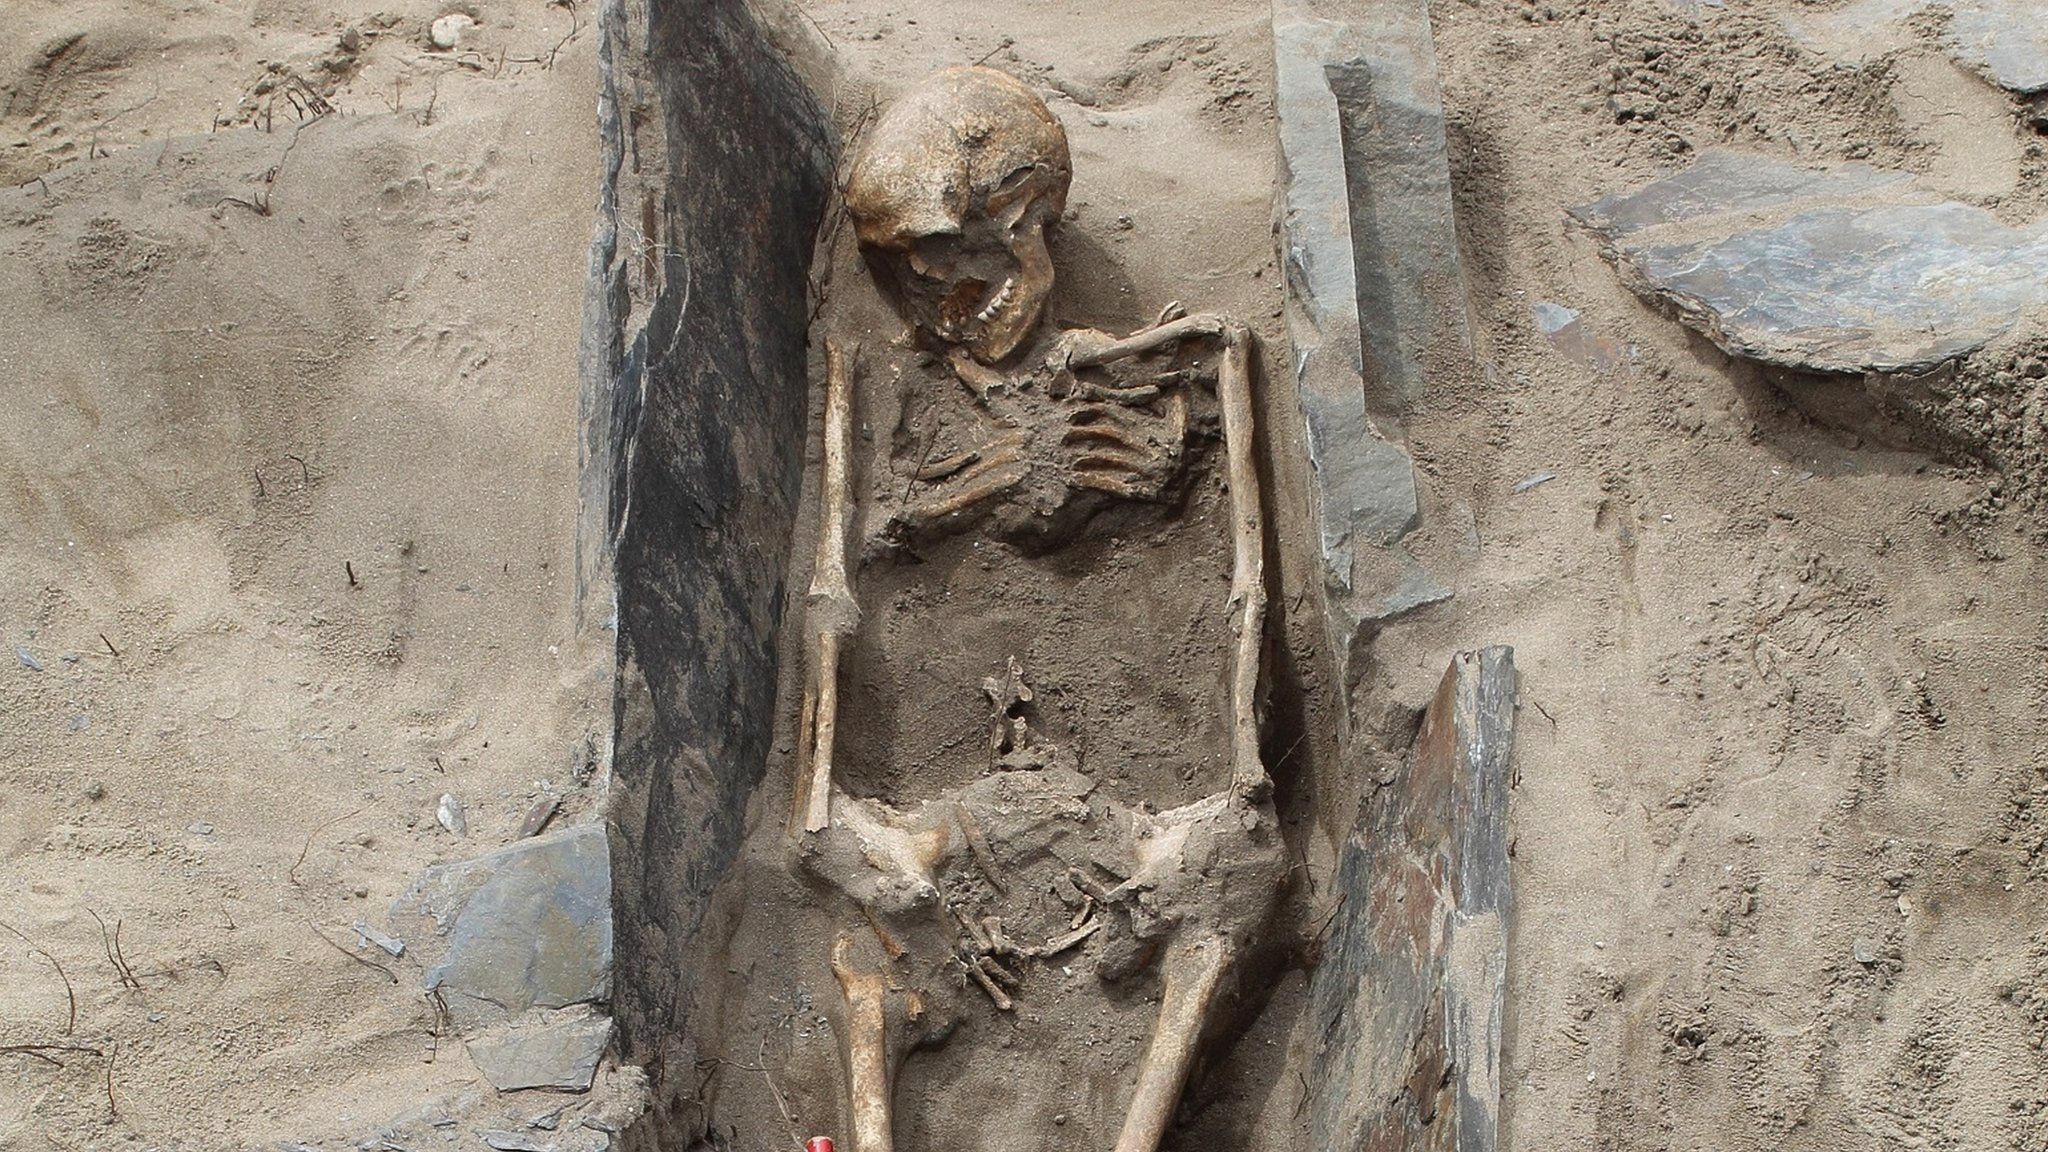 One of the skeletons at Whitseands Bay